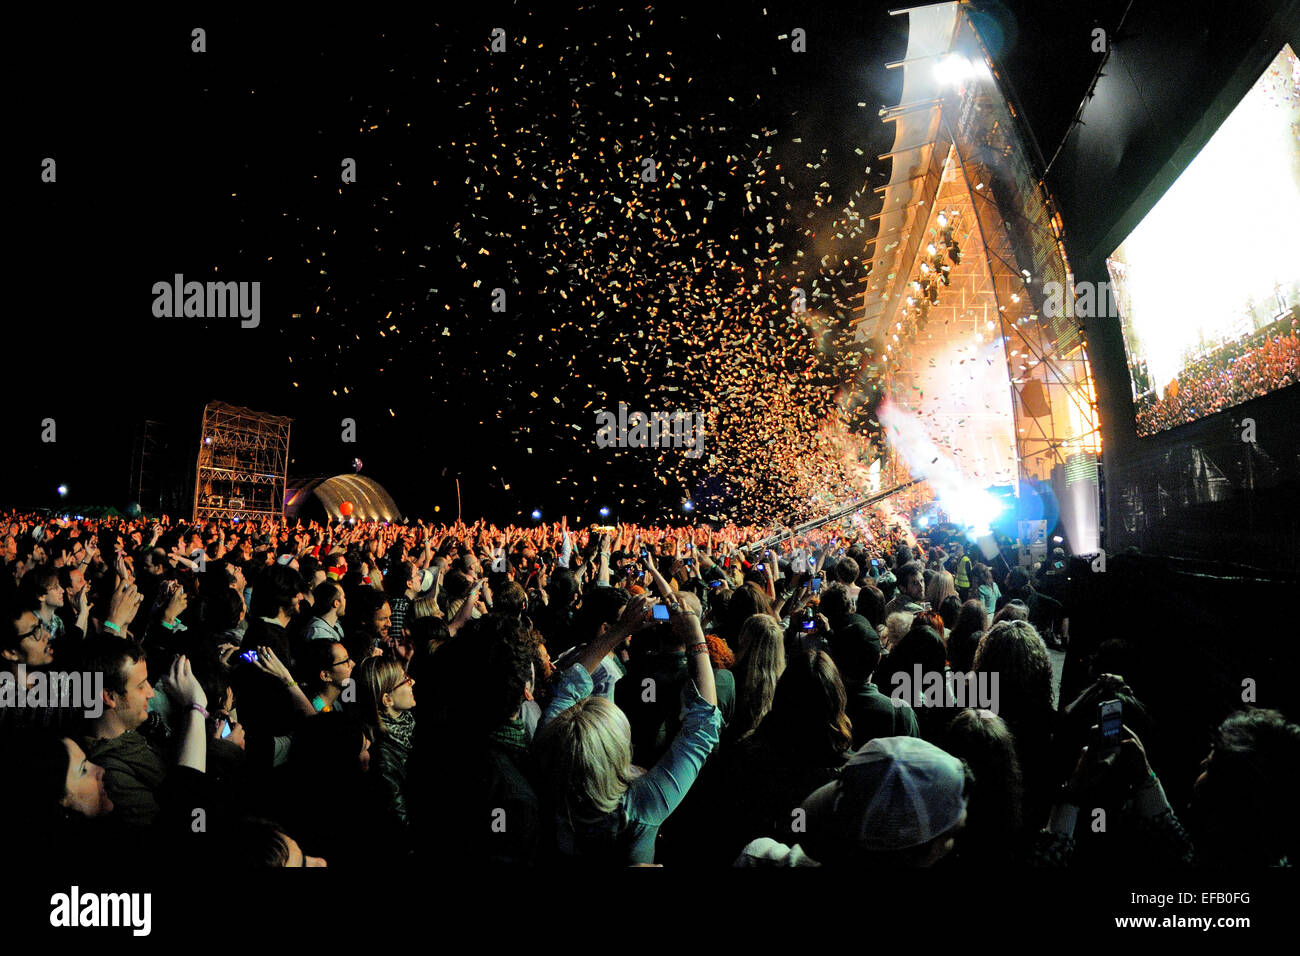 BARCELONA - MAY 23: Audience watch a concert, while throwing confetti from the stage at Heineken Primavera Sound 2013 Festival. Stock Photo